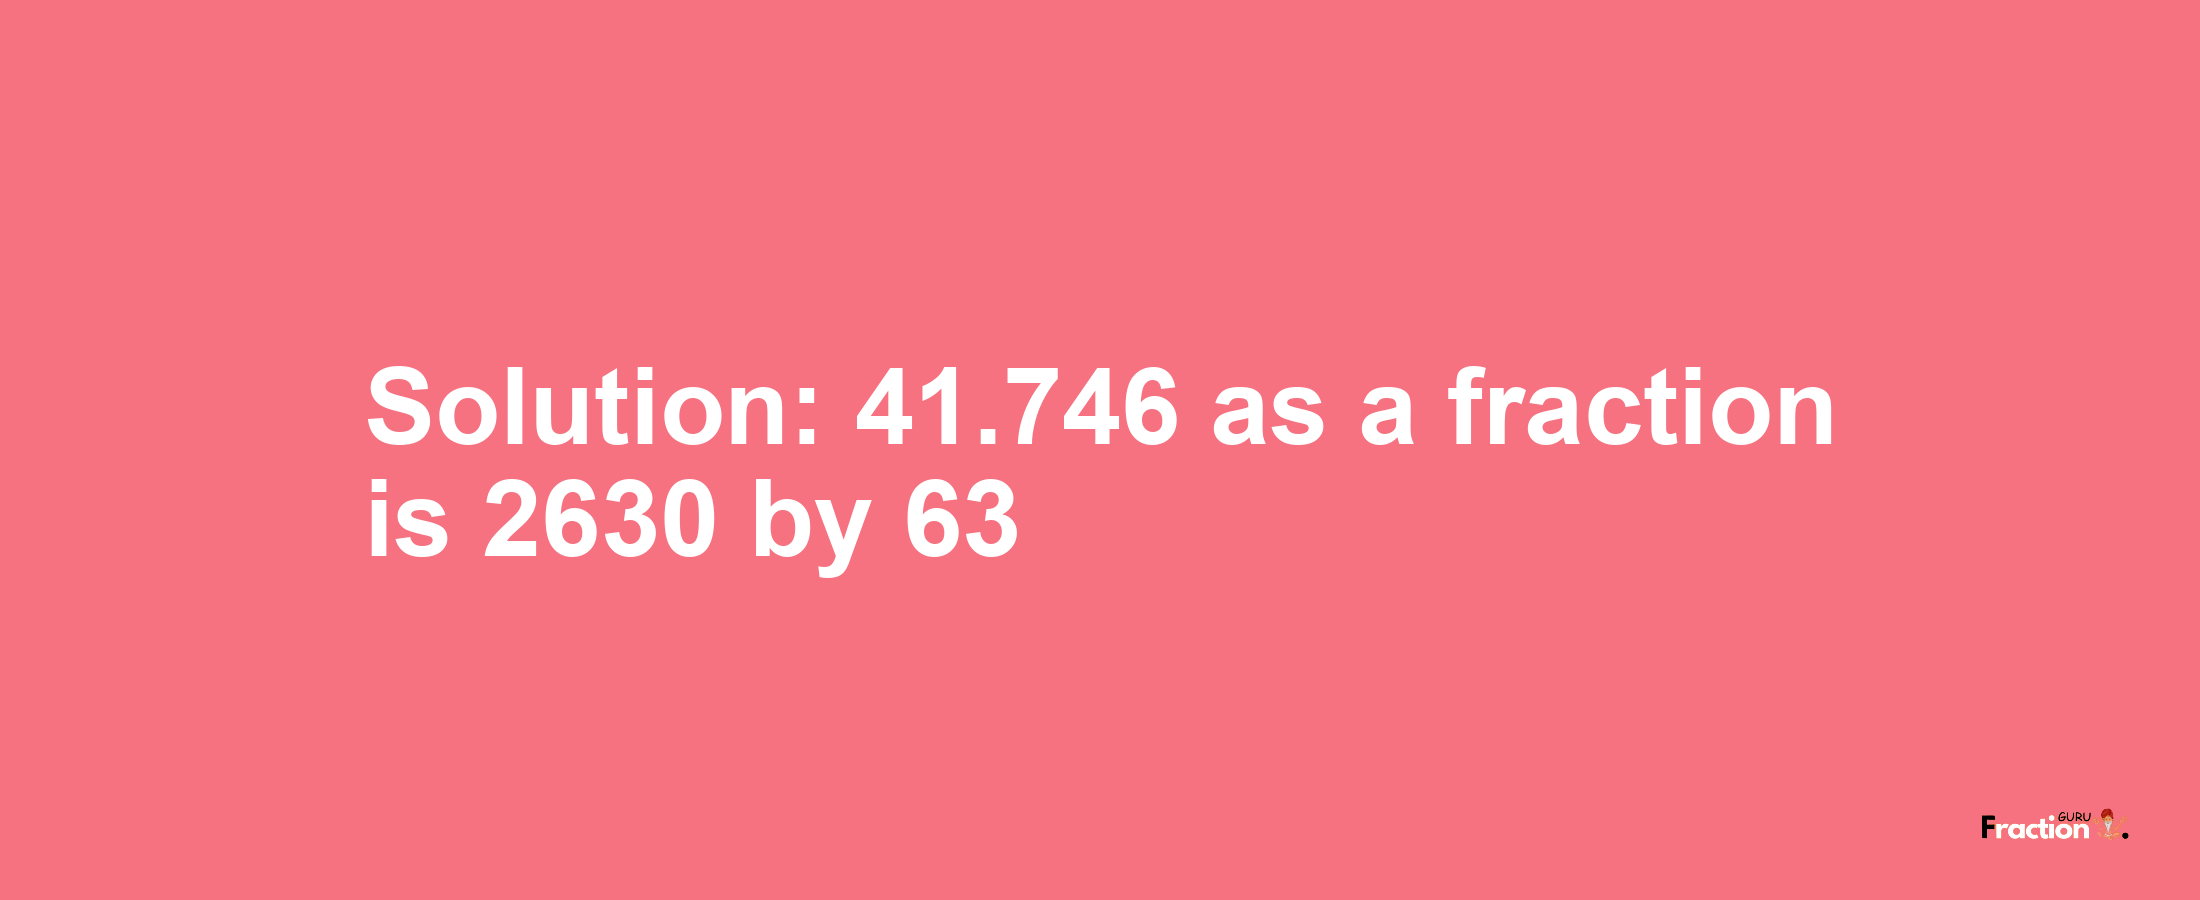 Solution:41.746 as a fraction is 2630/63